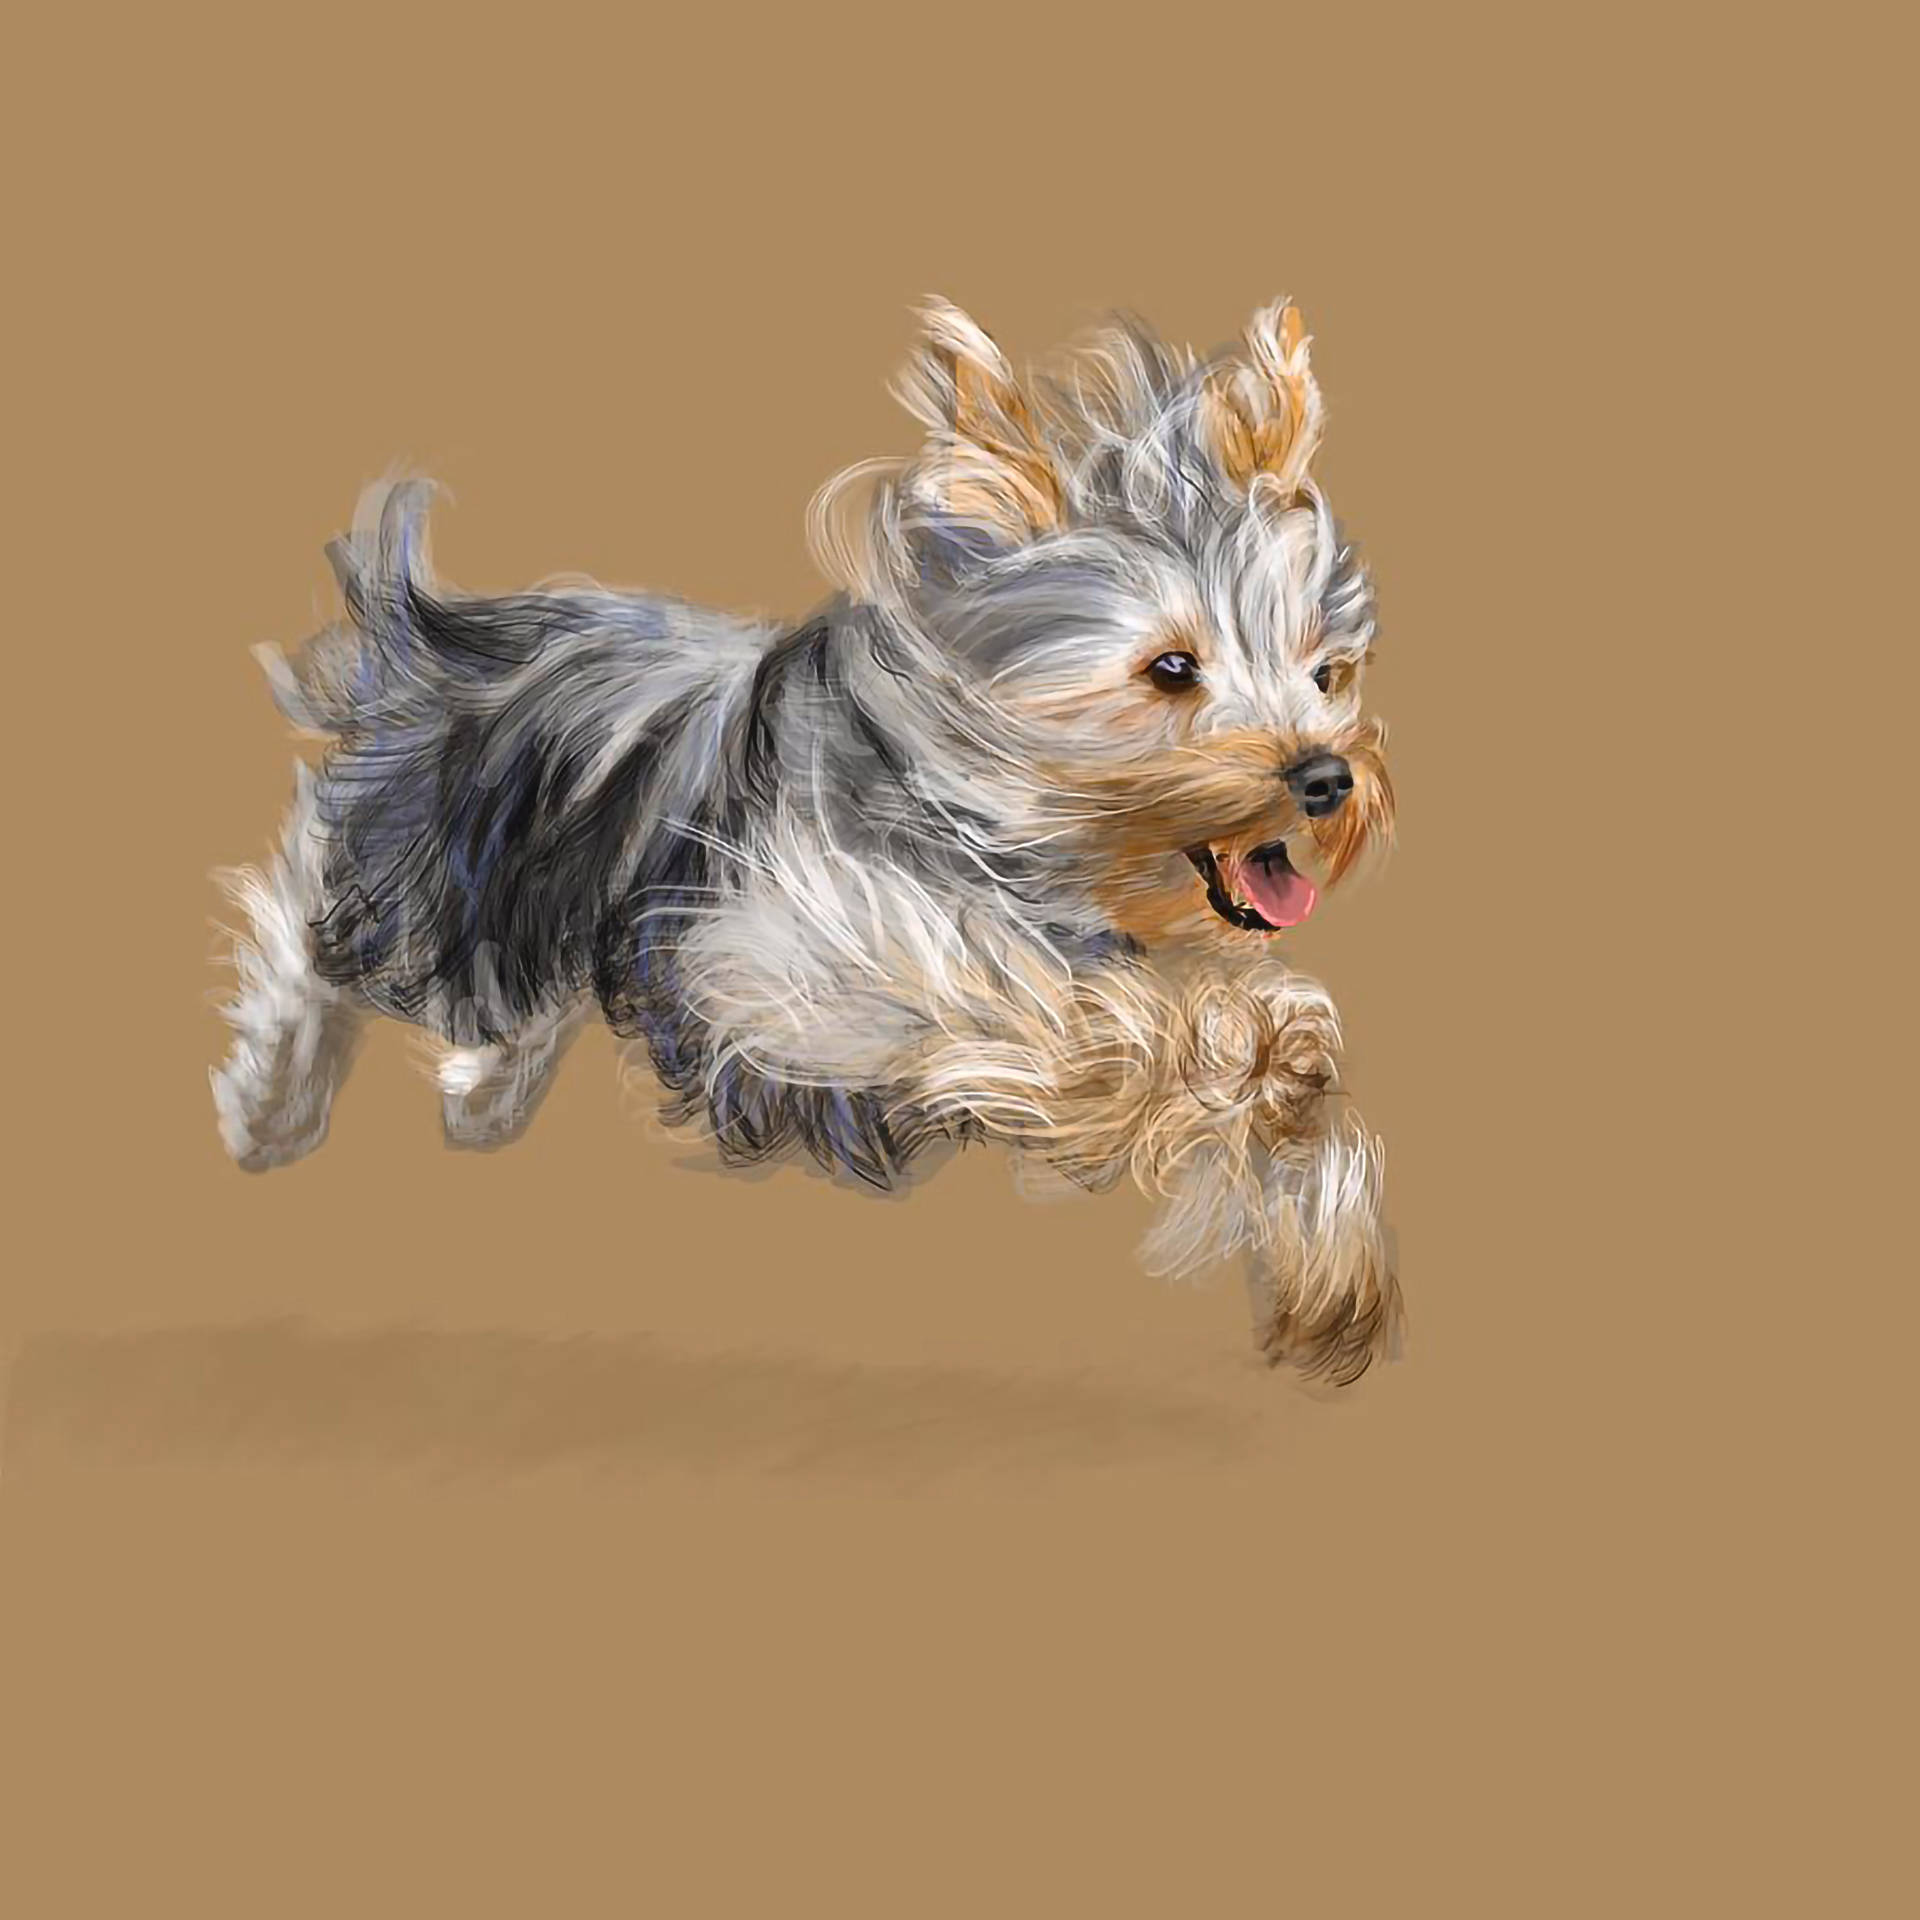 A Mid-air Yorkie Puppy Showcasing Playful Energy Background